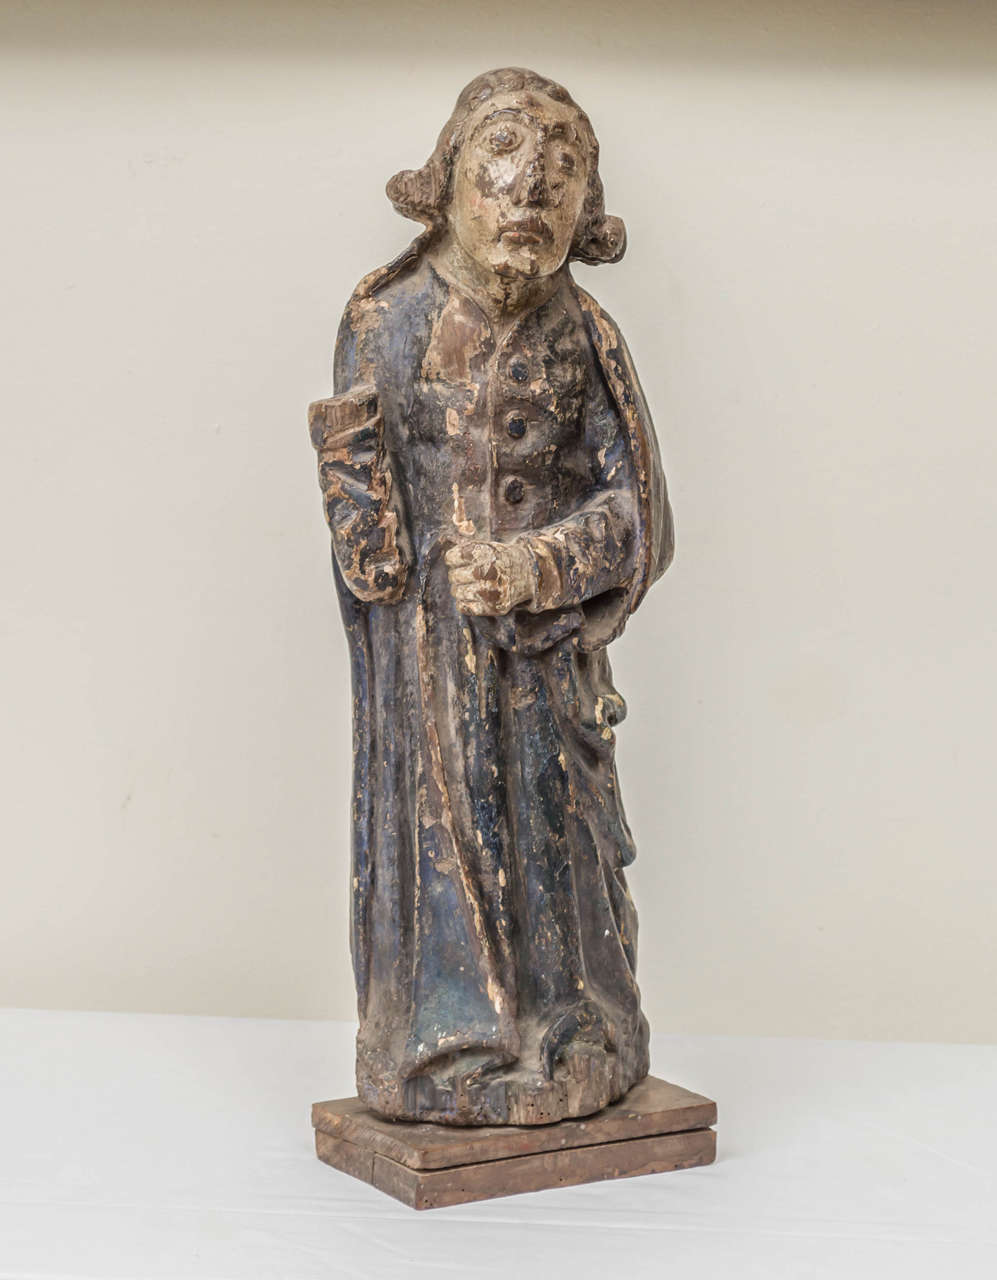 16th century French oak polychrome statue of Saint Maudez. A Breton saint from the 5th-6th century who founded a monastery off the coast of Brittany. Saint Maudez was said to have banished snakes, reptiles and worms.